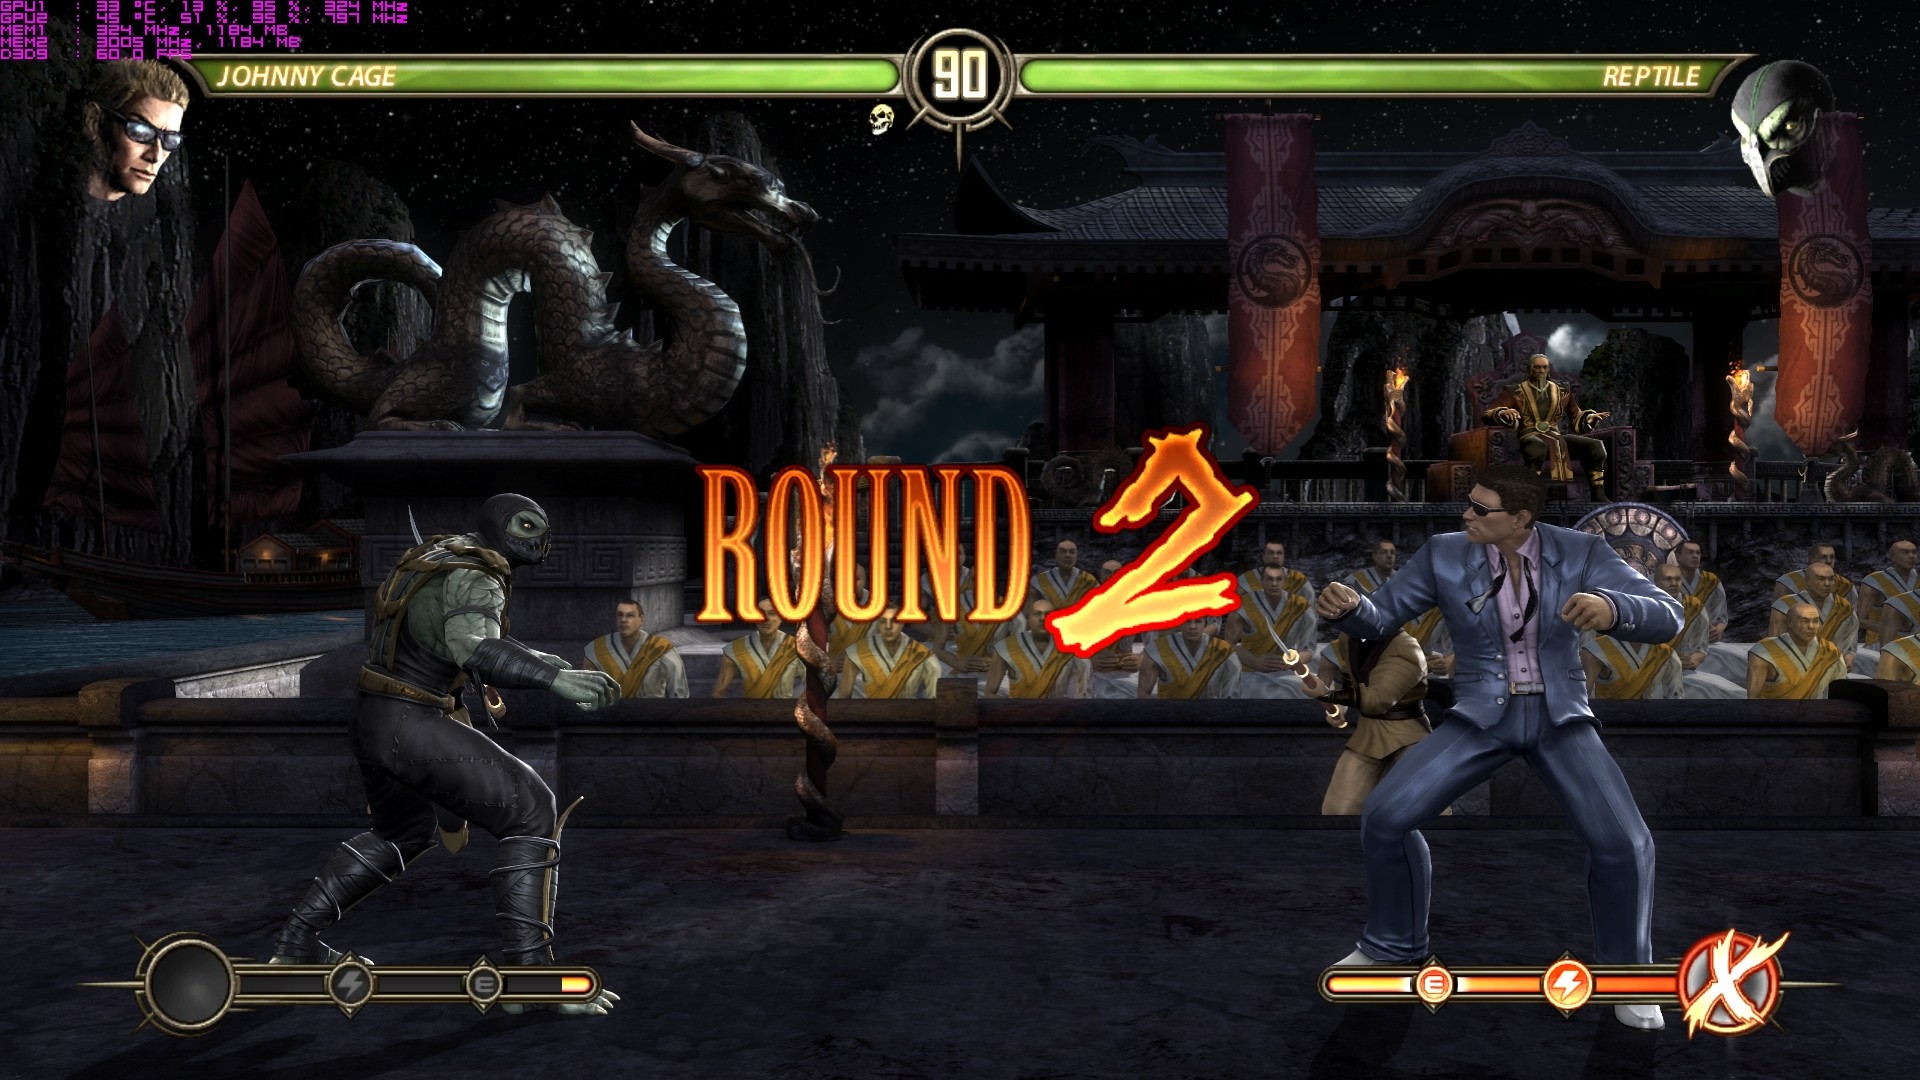 ANALYSIS: “Fatality!” MORTAL KOMBAT and the history of video game